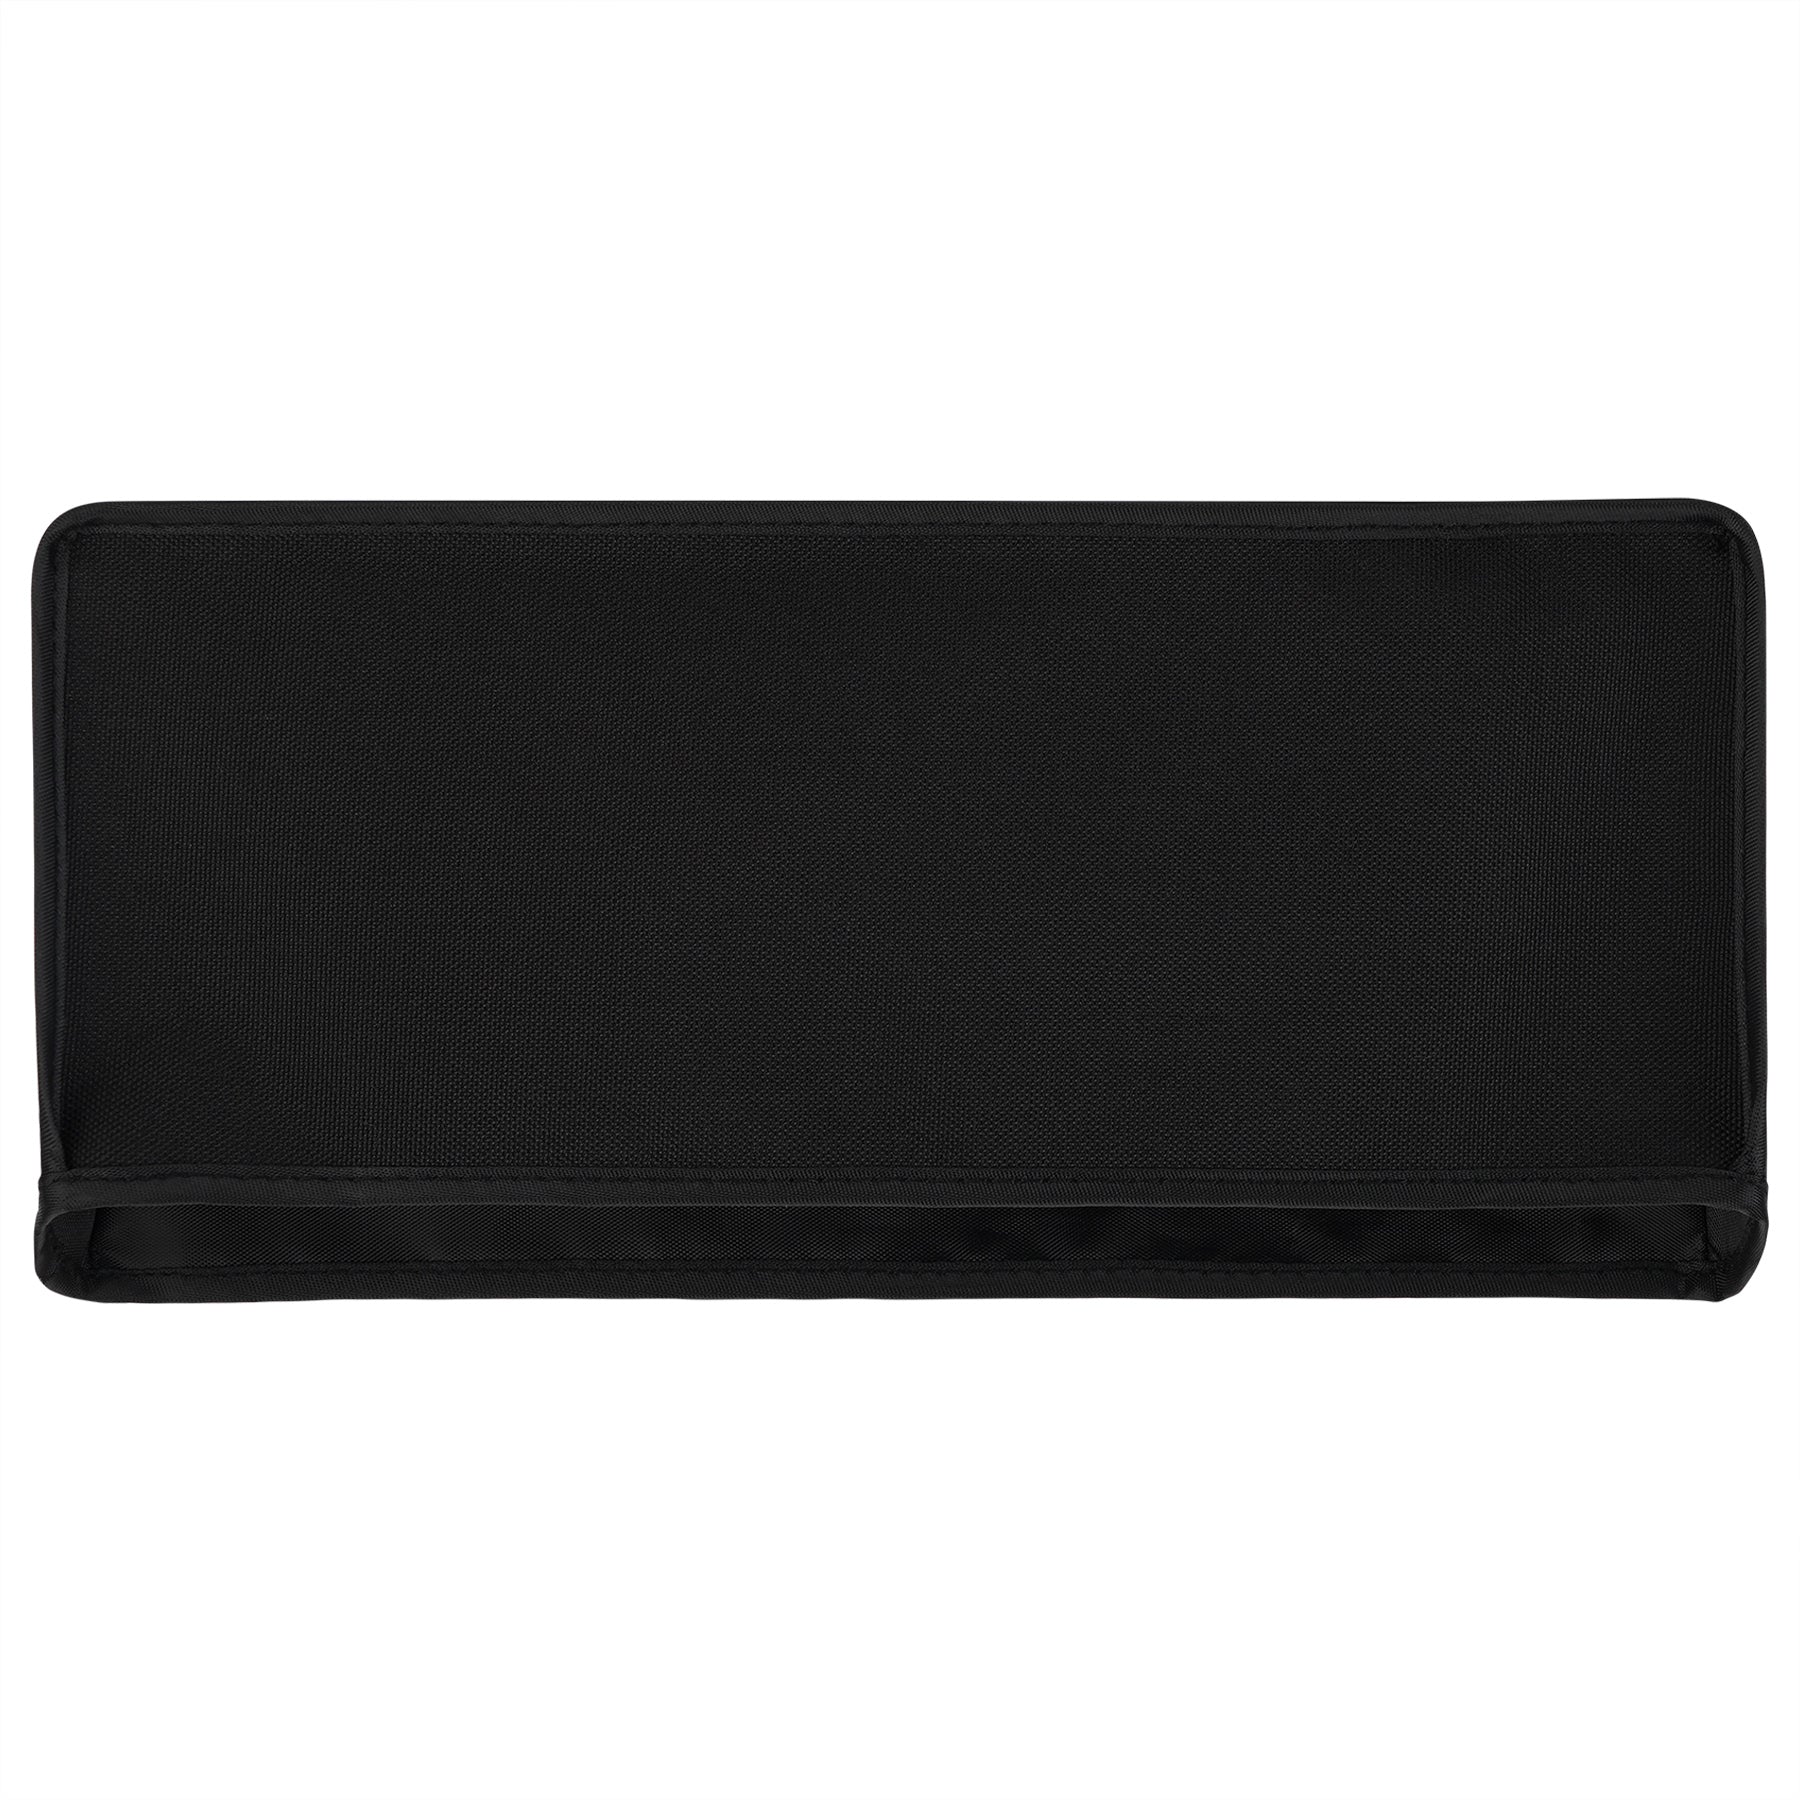 PlayVital Soft Neat Lining Dust Cover for Steam Deck - Black - PCSDM001 PlayVital